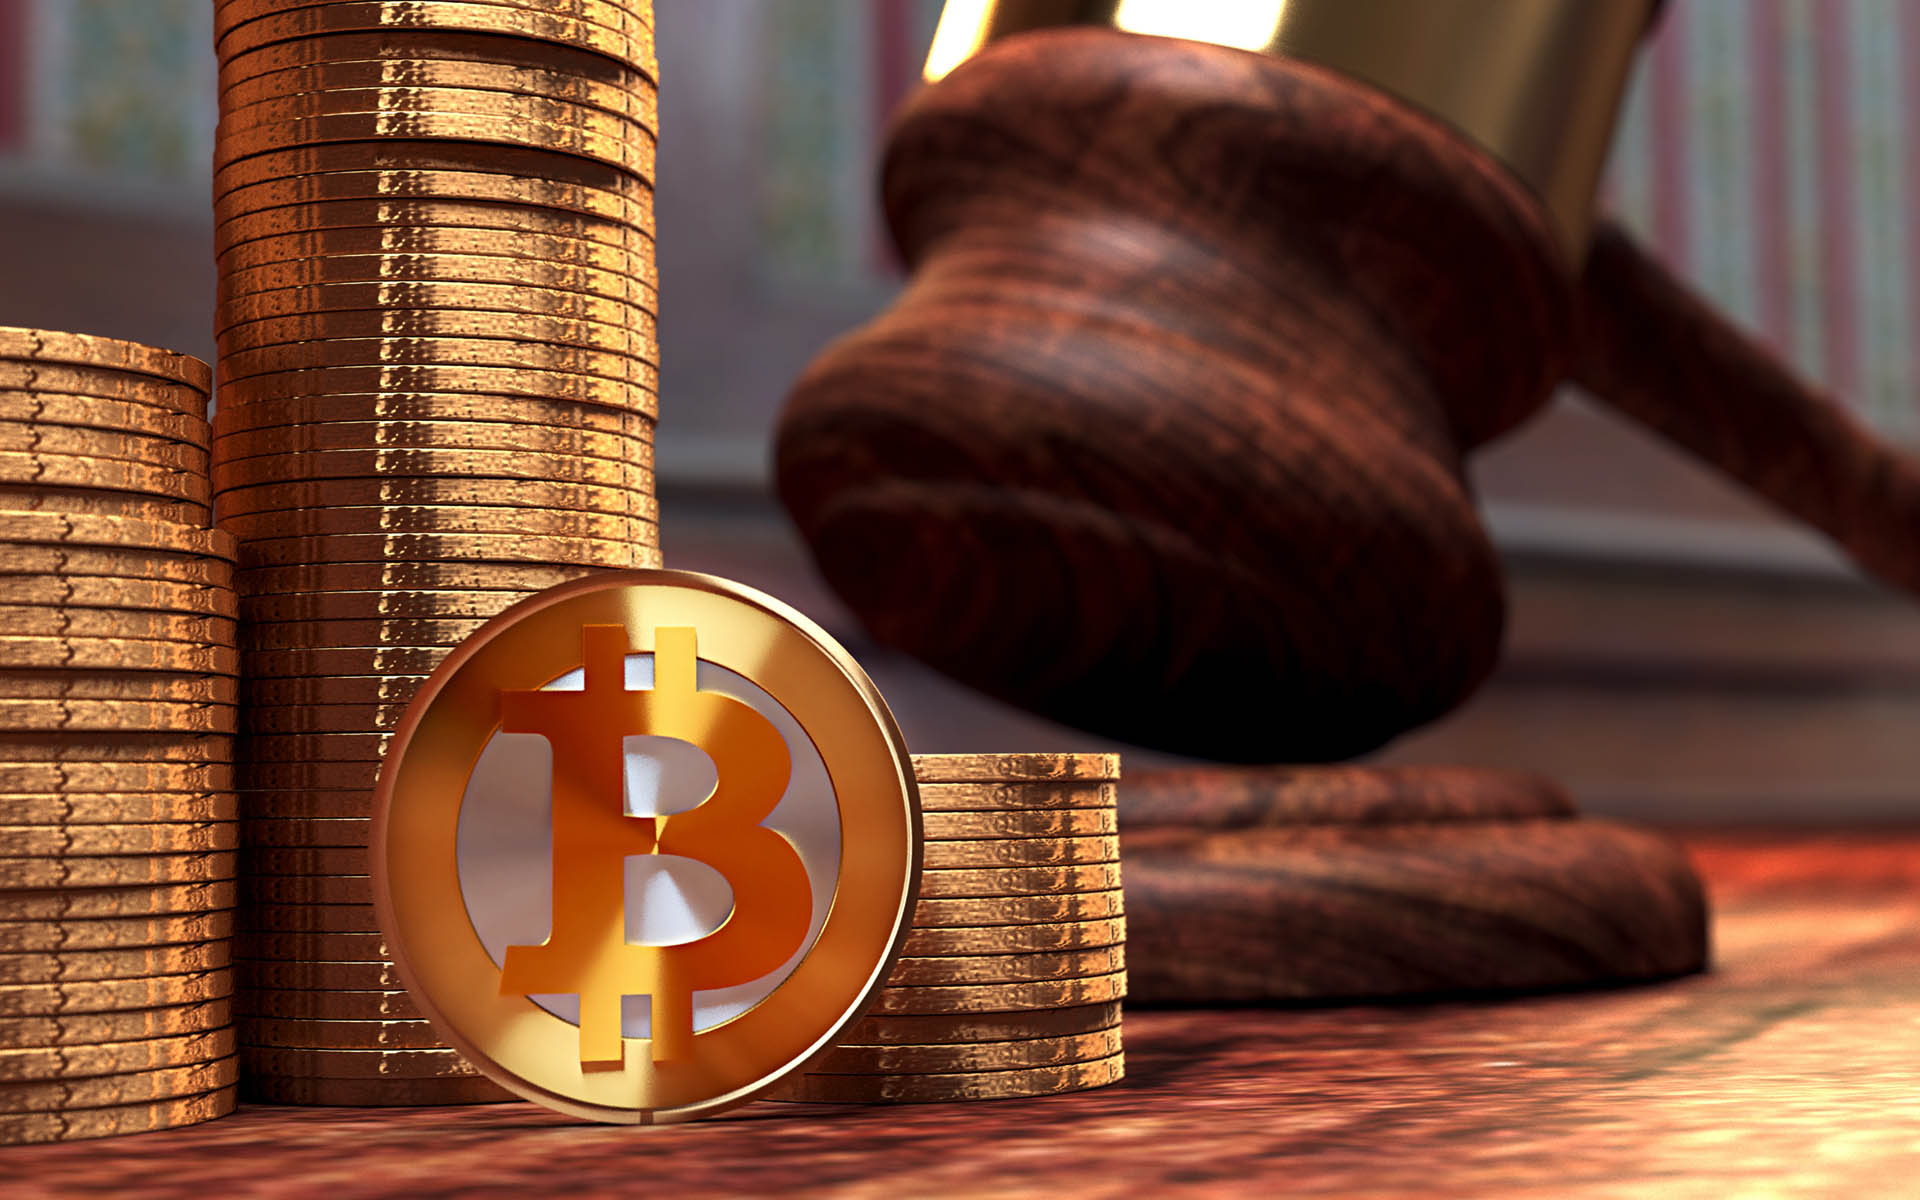 Convictions, Jail Time On The Rise In The U.S. For Selling Bitcoin